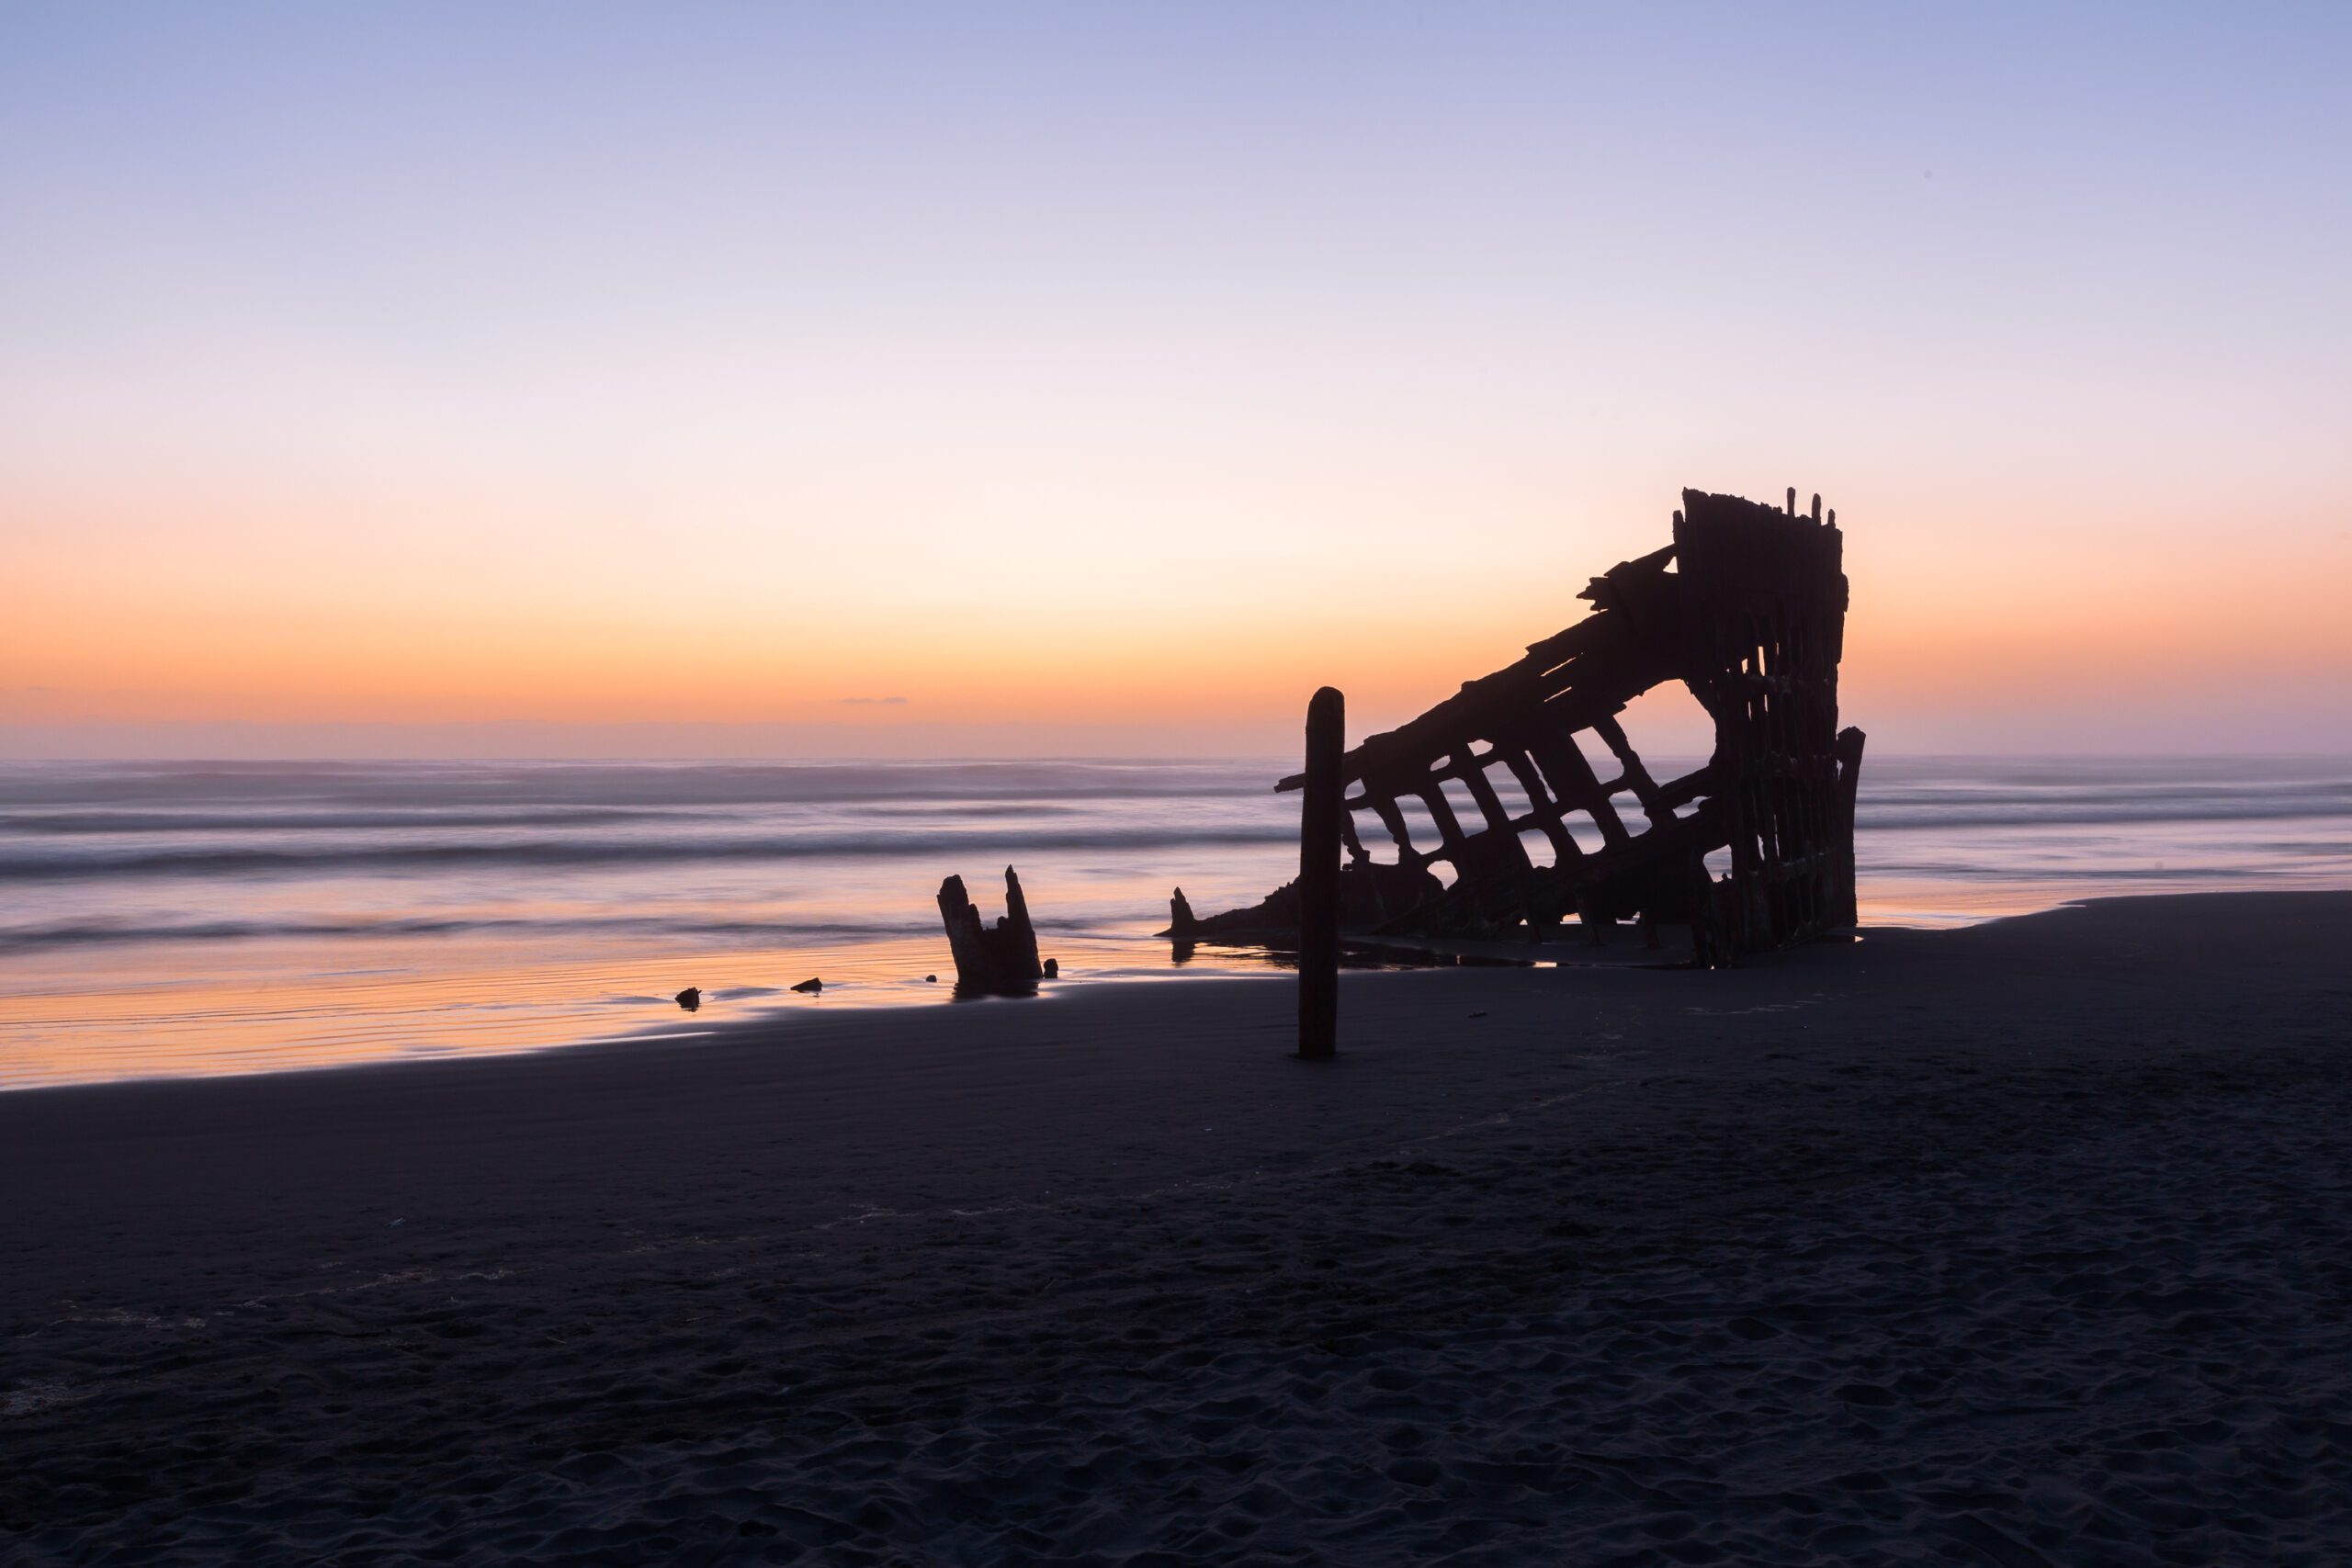 This print encapsulates a haunting yet breathtaking view of the Peter Iredale shipwreck, gloriously silhouetted against a vibrant sunset